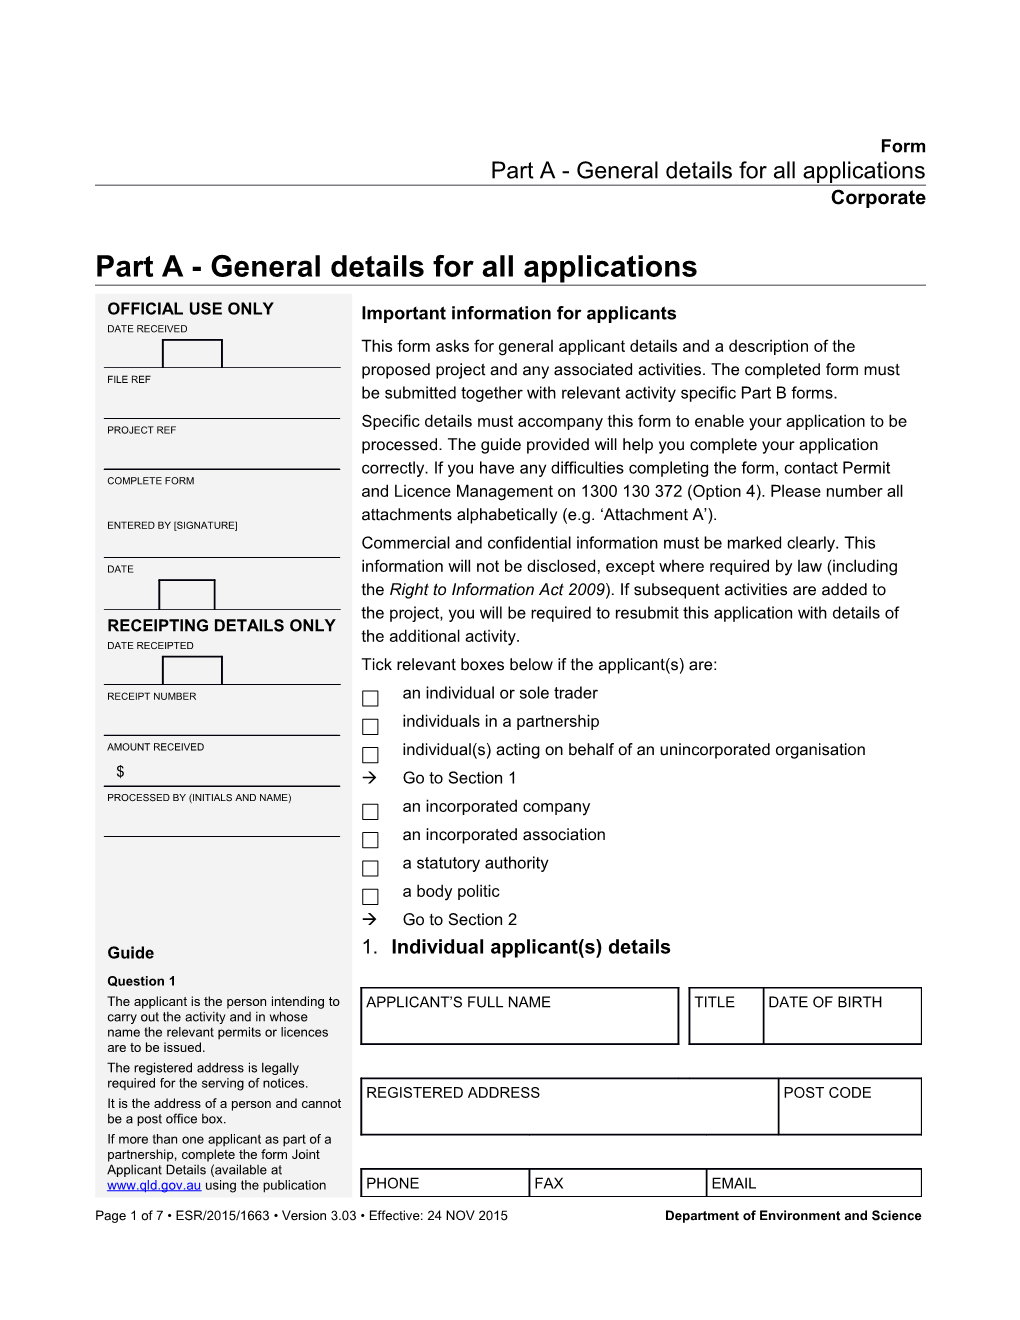 Part a - General Details for All Applications